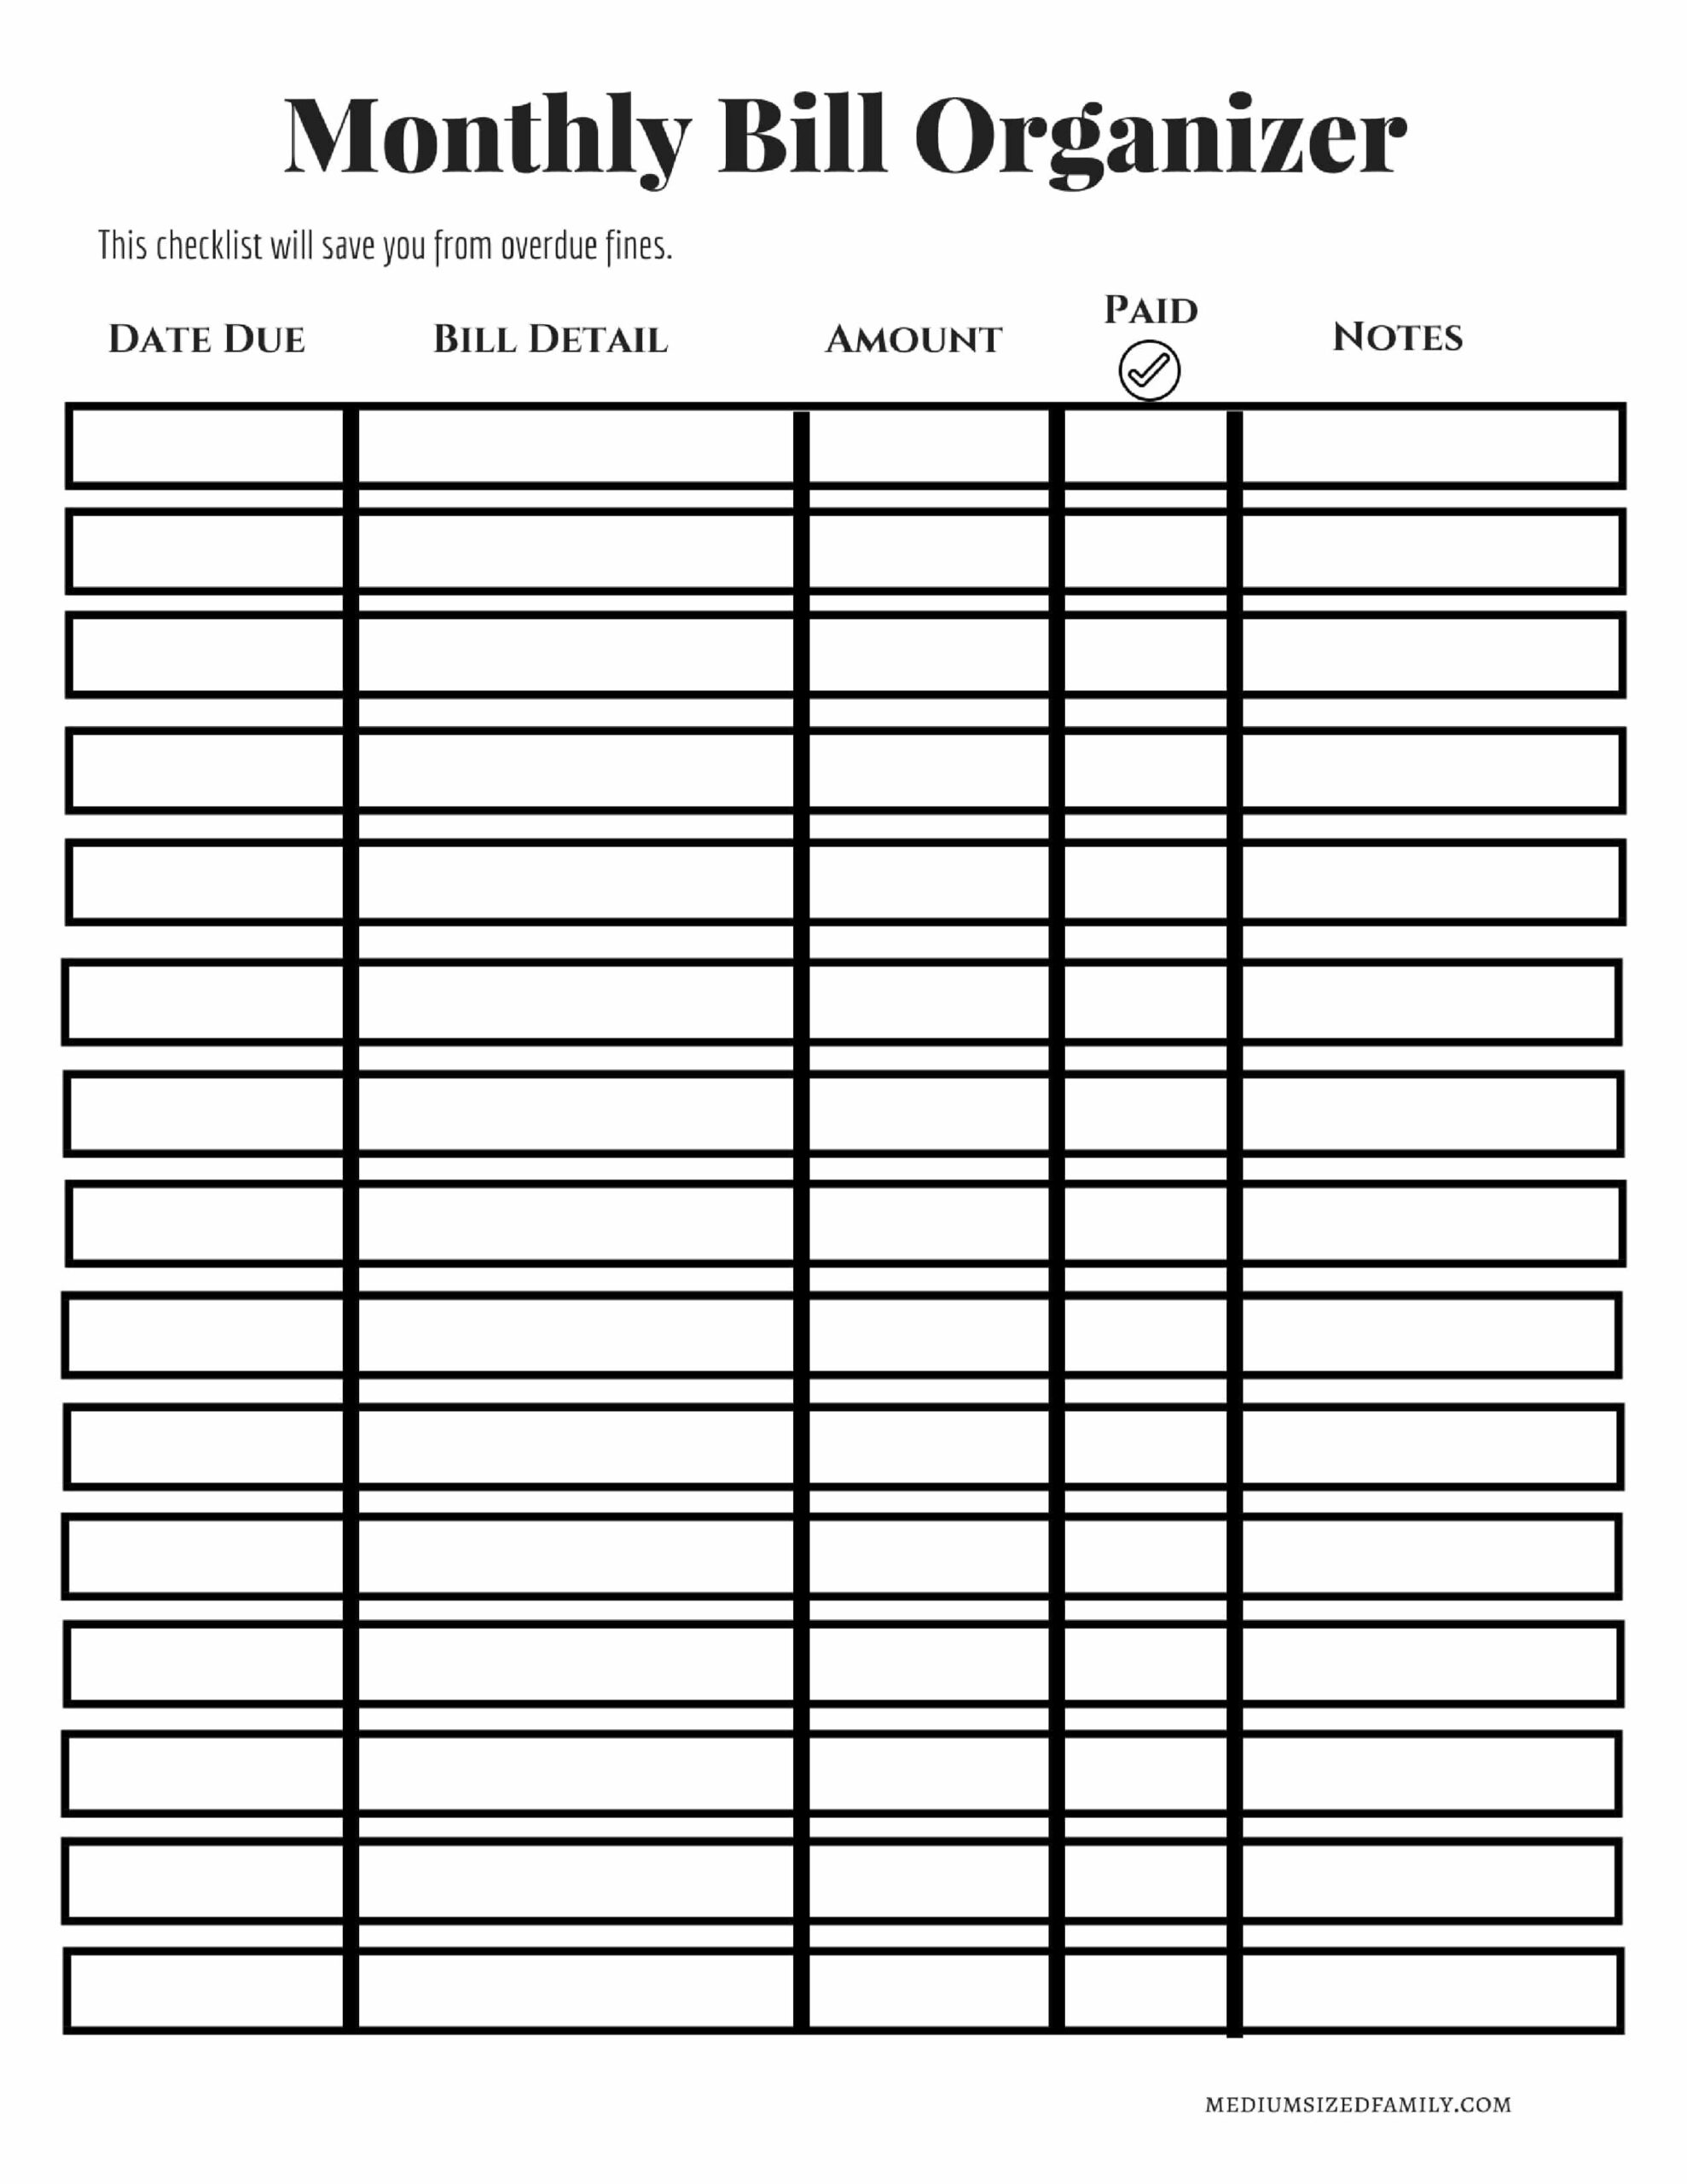 Monthly Bill Organization - The Free Monthly Bill  Monthly Bill Printable Free